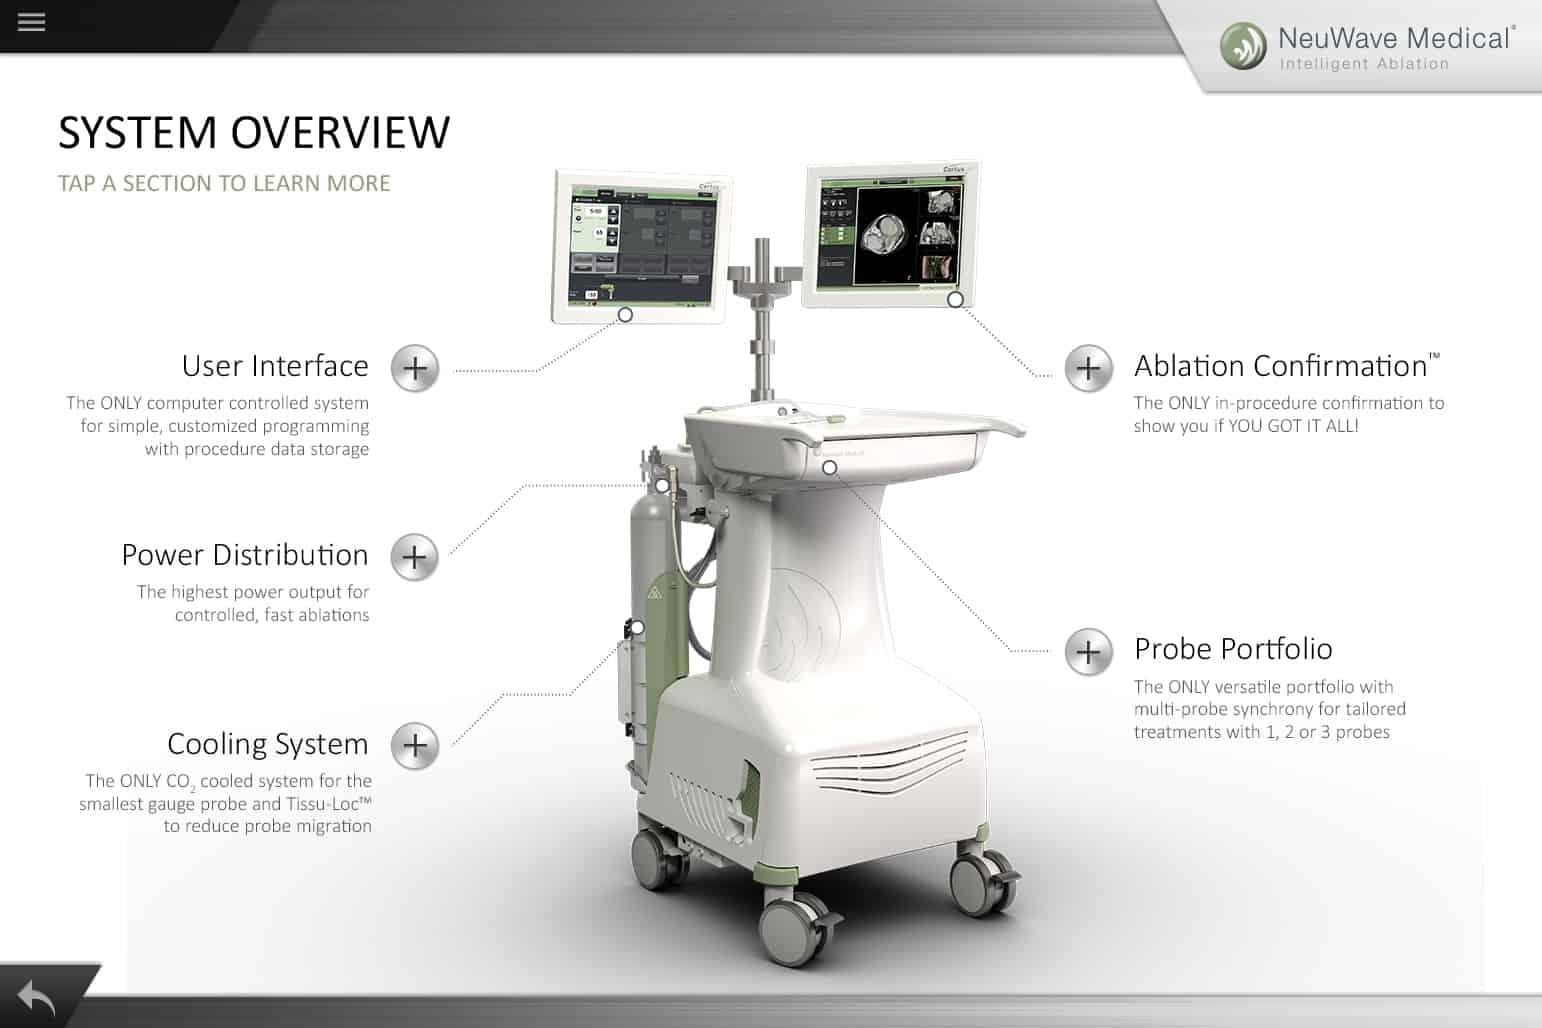 NeuwaveDevice-Overview-Page image